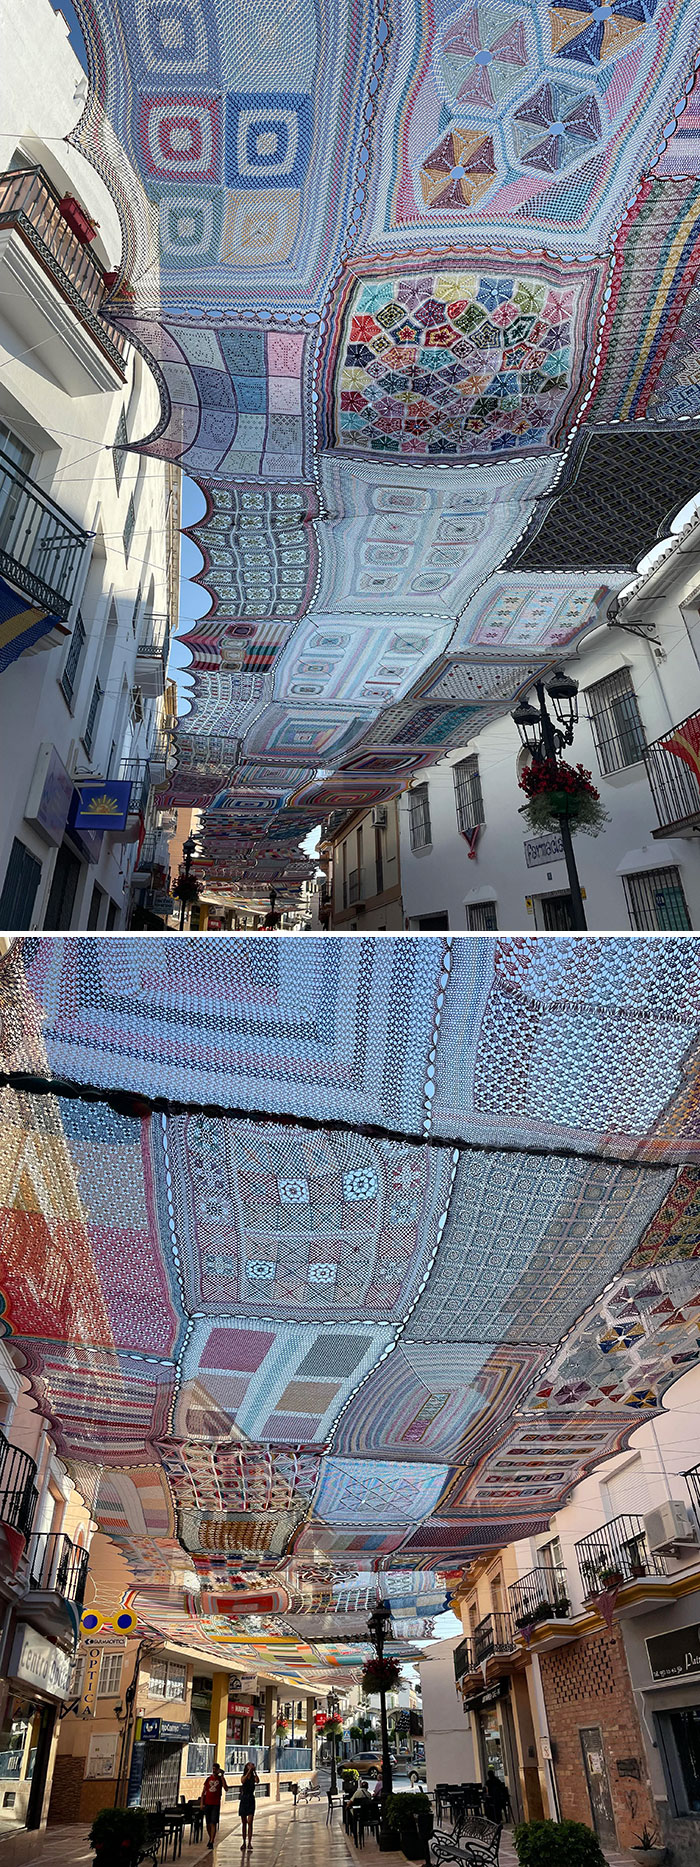 Ladies In My Village In Southern Spain Crochet And Hang These Over This Street